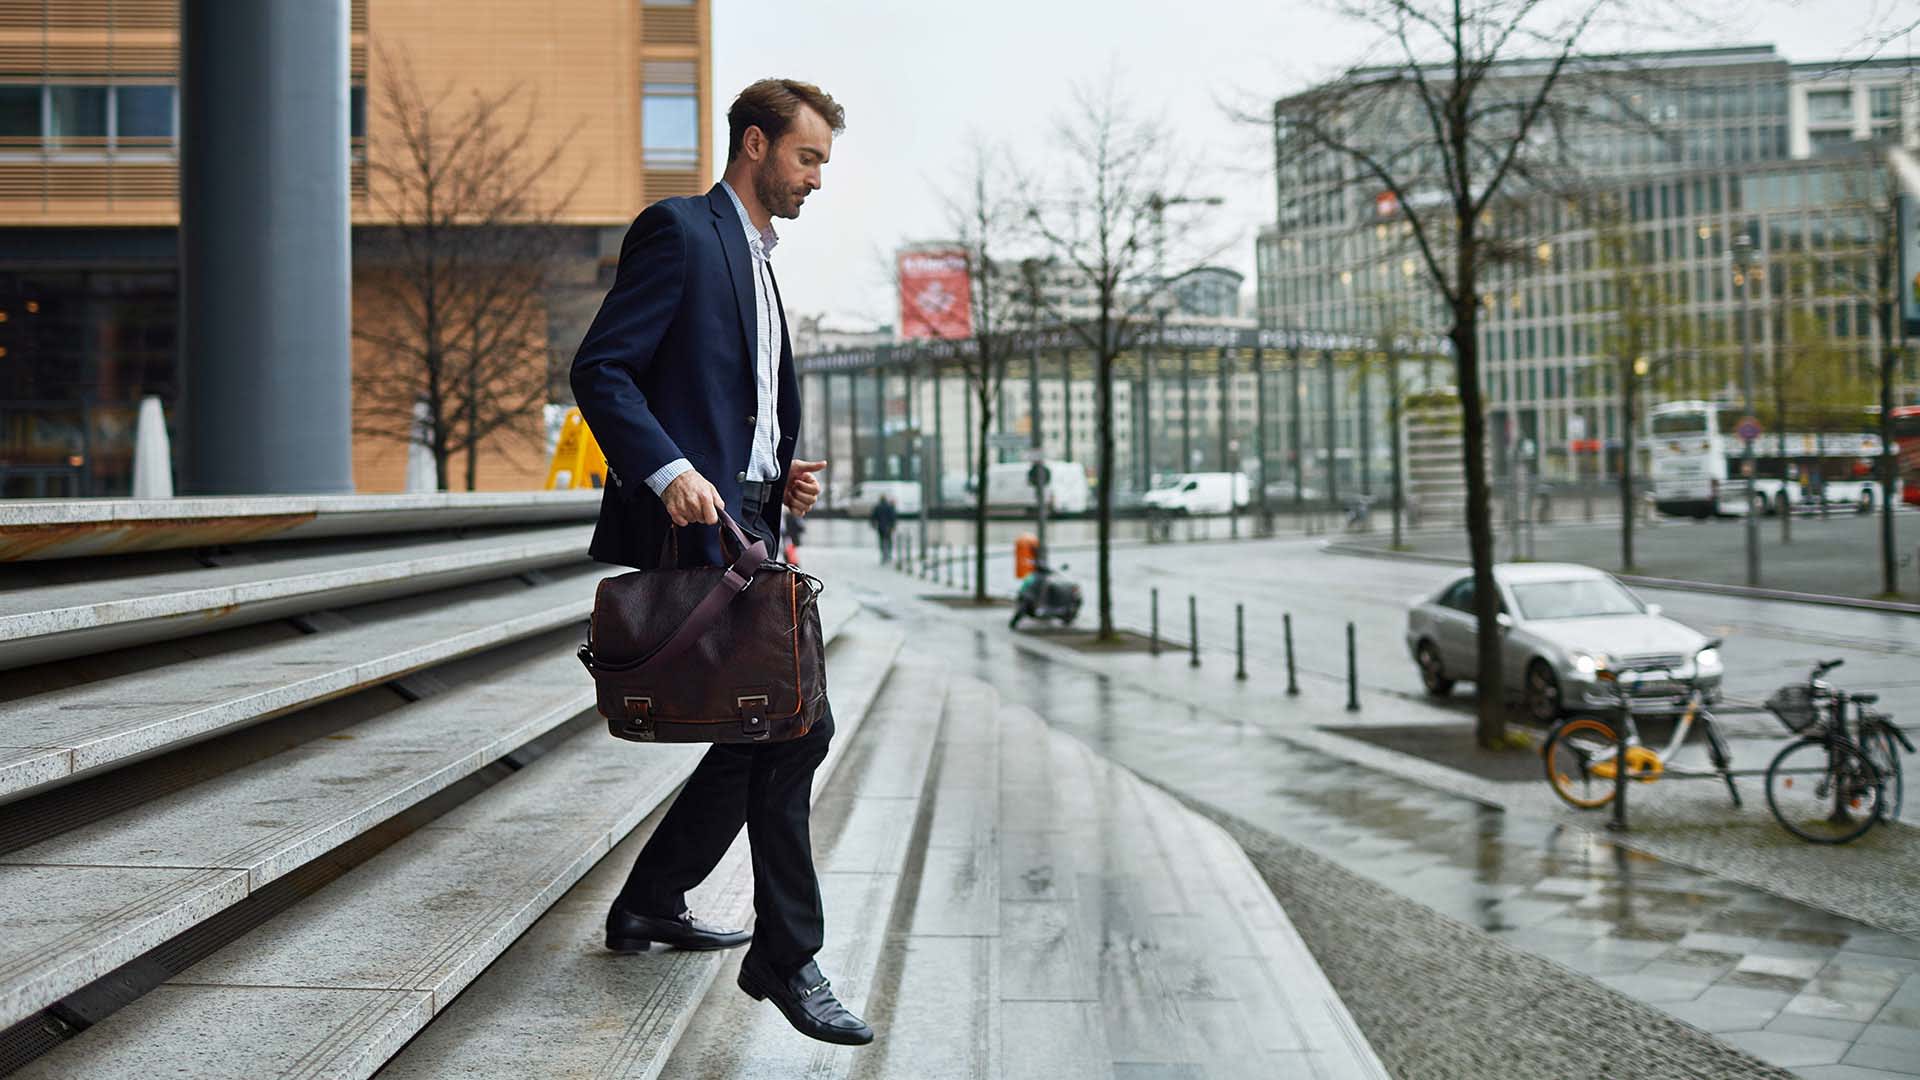 New Research Just Revealed the Big Change Most People Make When They Quit Their Jobs in 2022